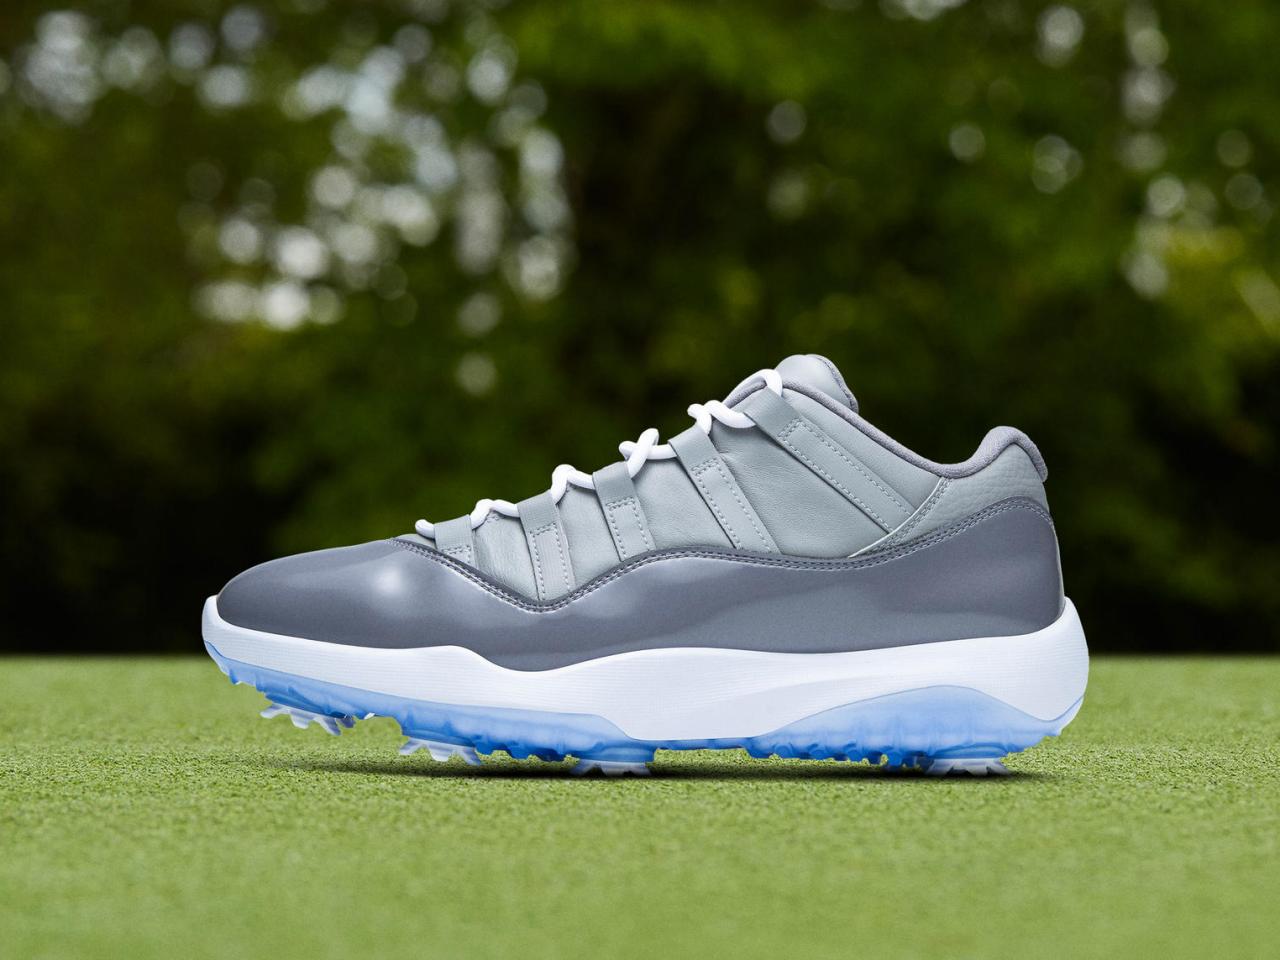 Nike's latest Air Jordan golf-shoe drop makes its trademark model available  in a highly popular color | Golf Equipment: Clubs, Balls, Bags | Golf Digest